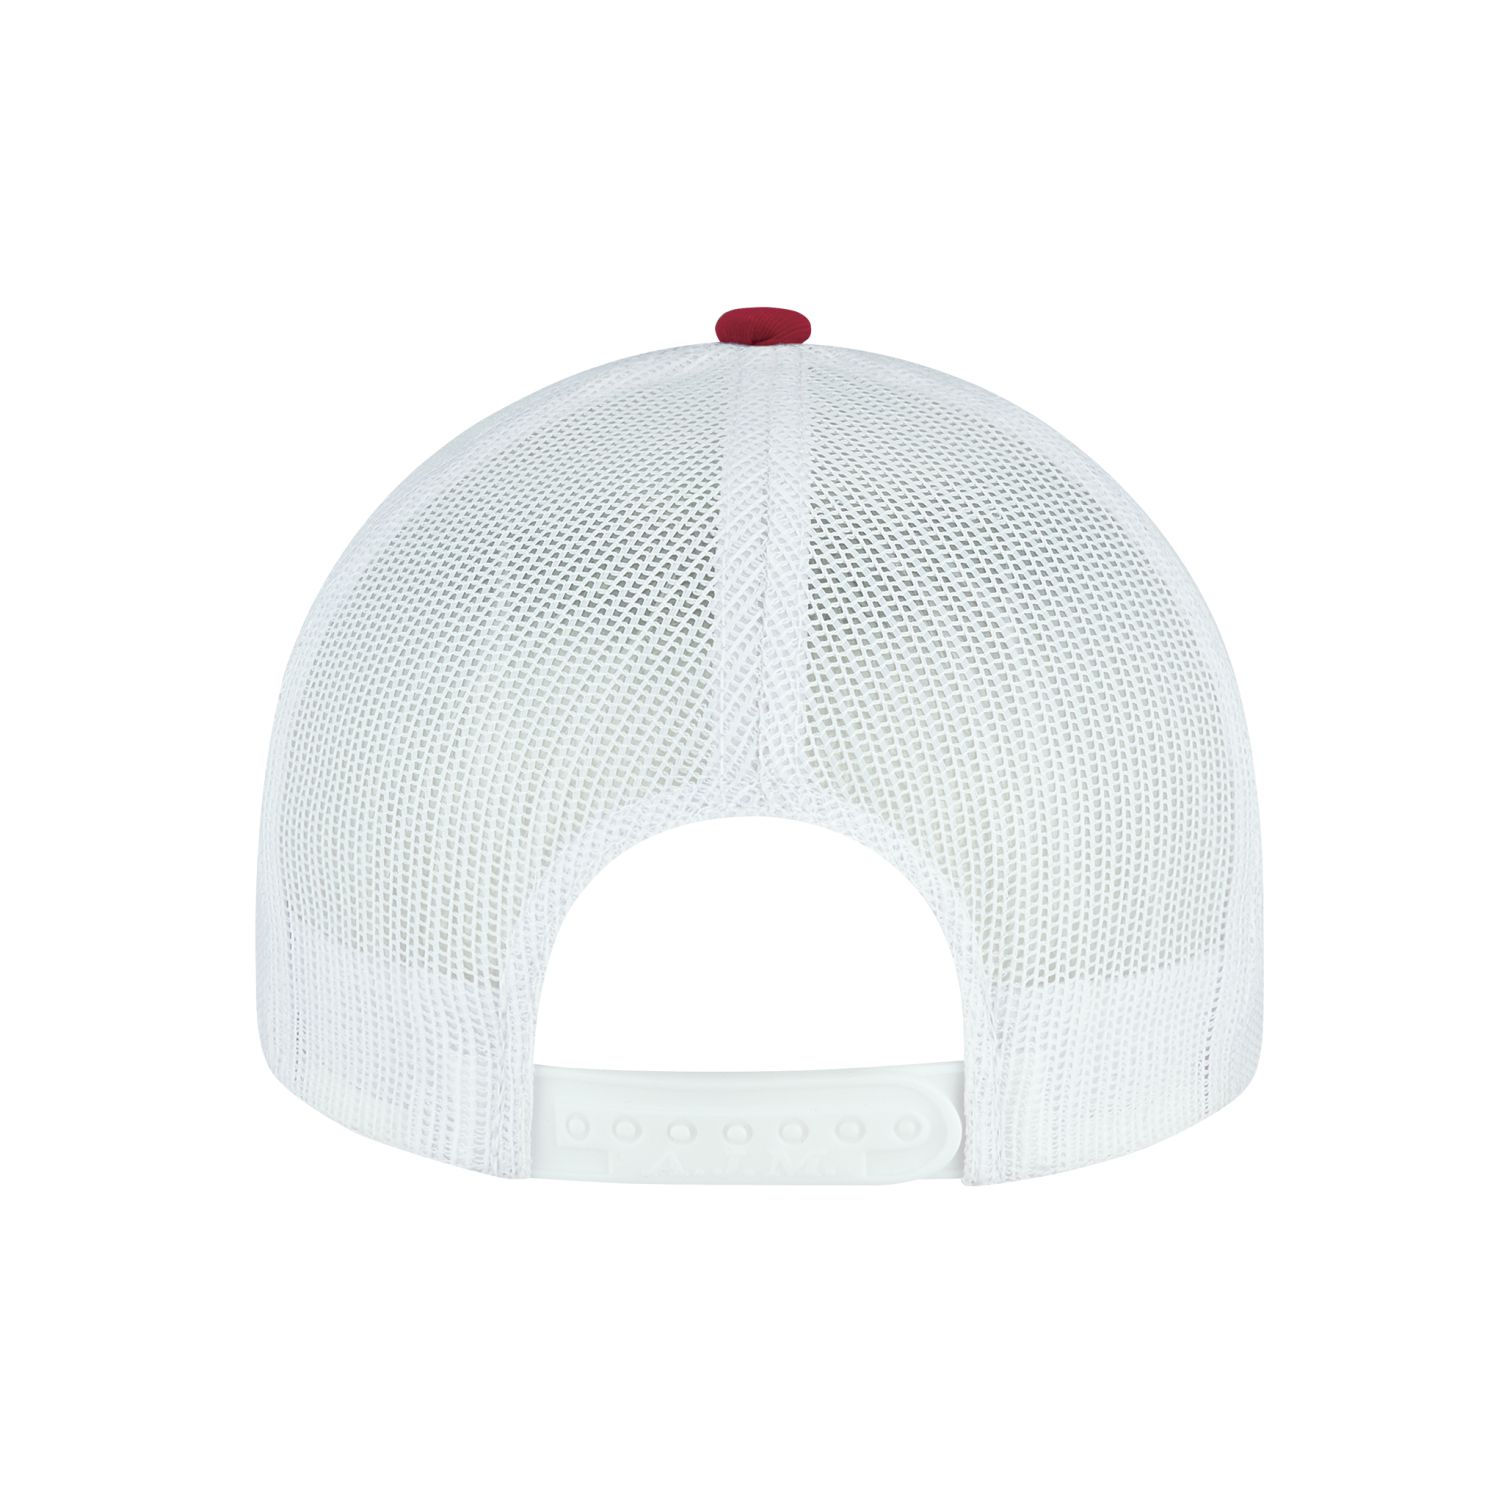 AJM Cotton Drill / Polyester Heather / Nylon Mesh 6 Panel Constructed Full-Fit Hat (Mesh Back) #4G645M Red / Charcoal / White Back